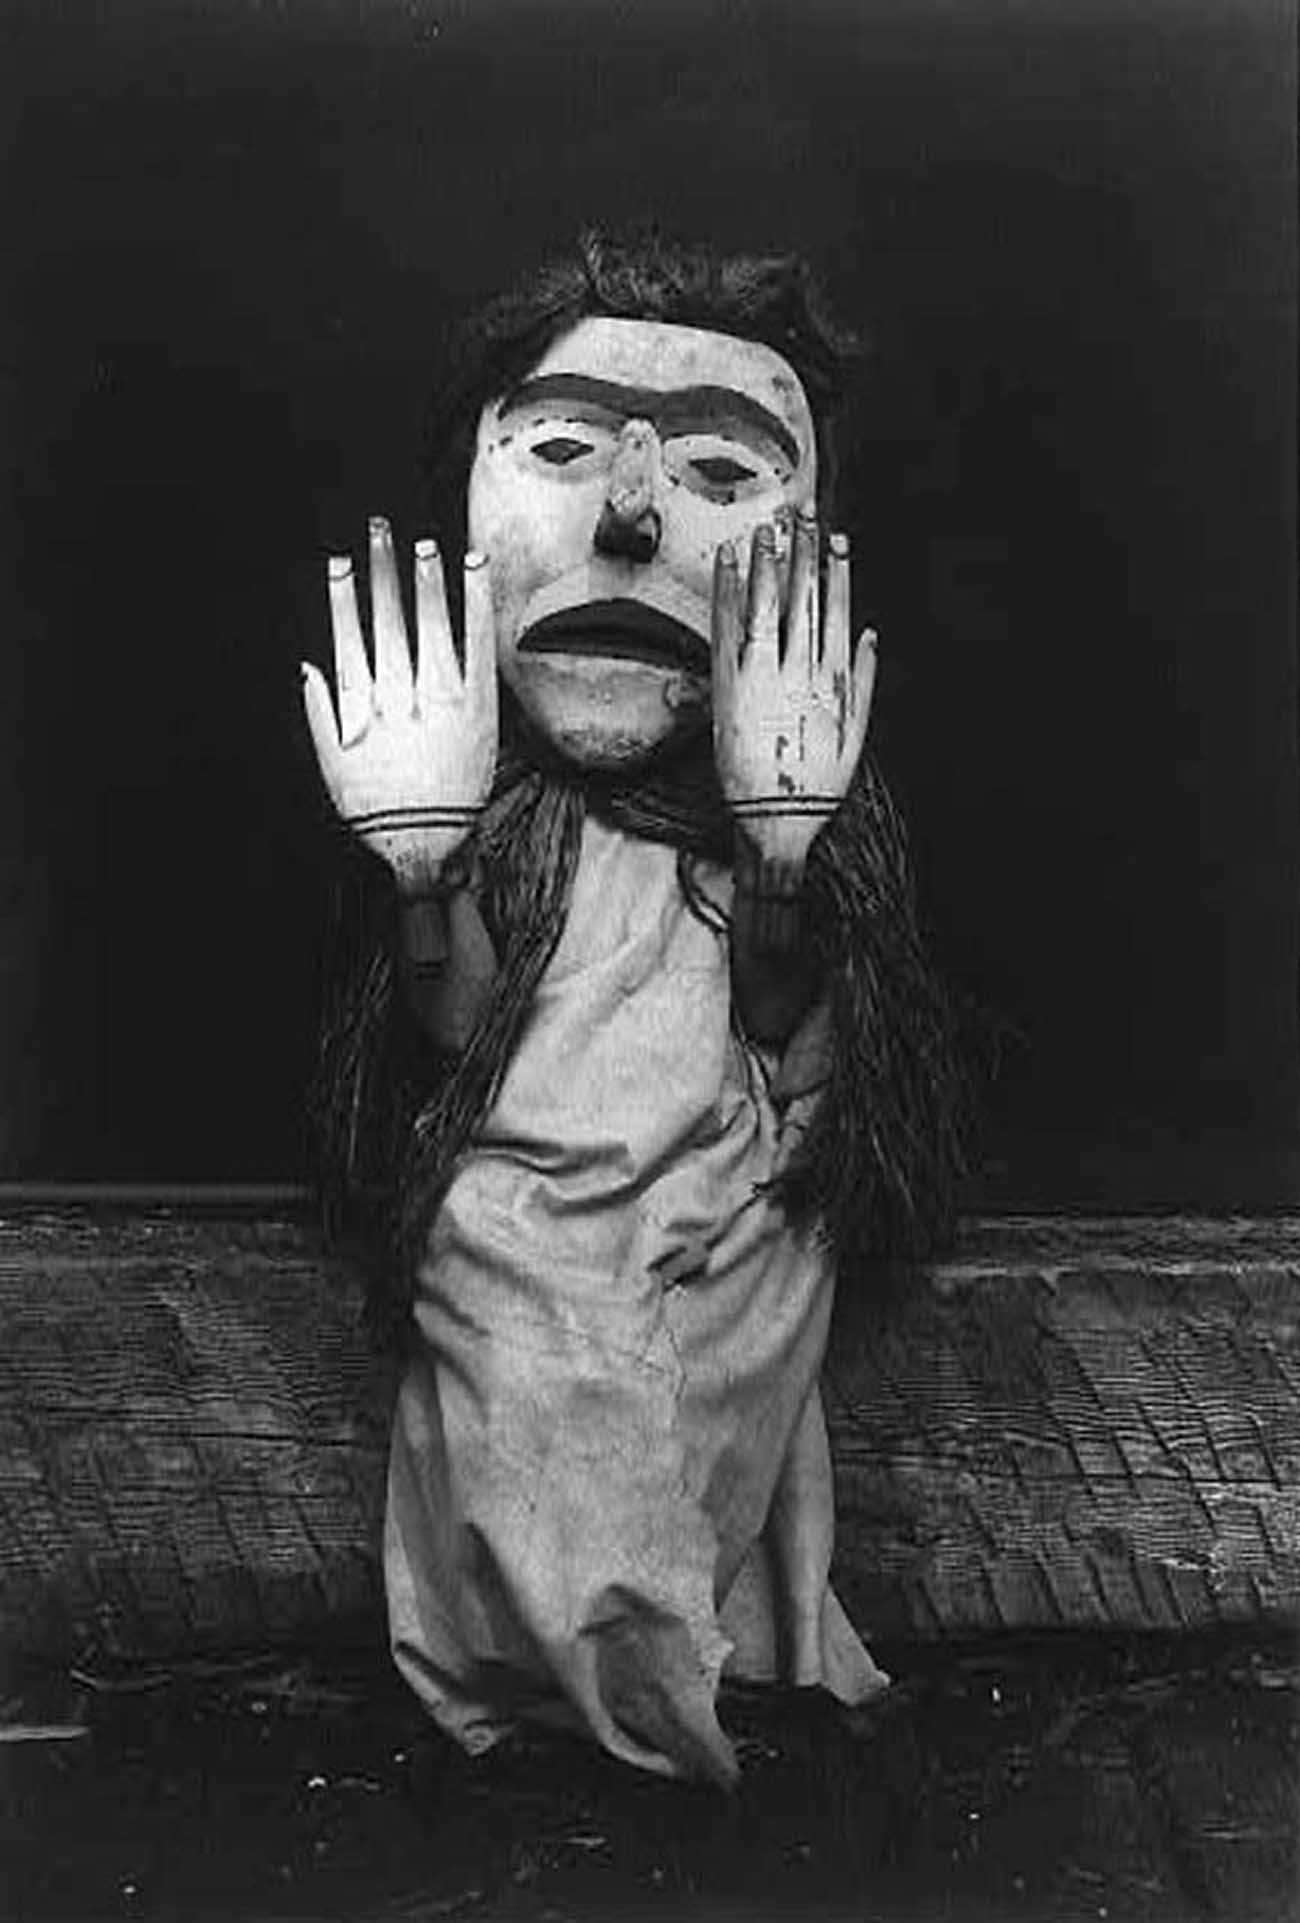 Kwakiutl person wearing an oversize mask and hands representing a forest spirit, Nuhlimkilaka, (“bringer of confusion”).